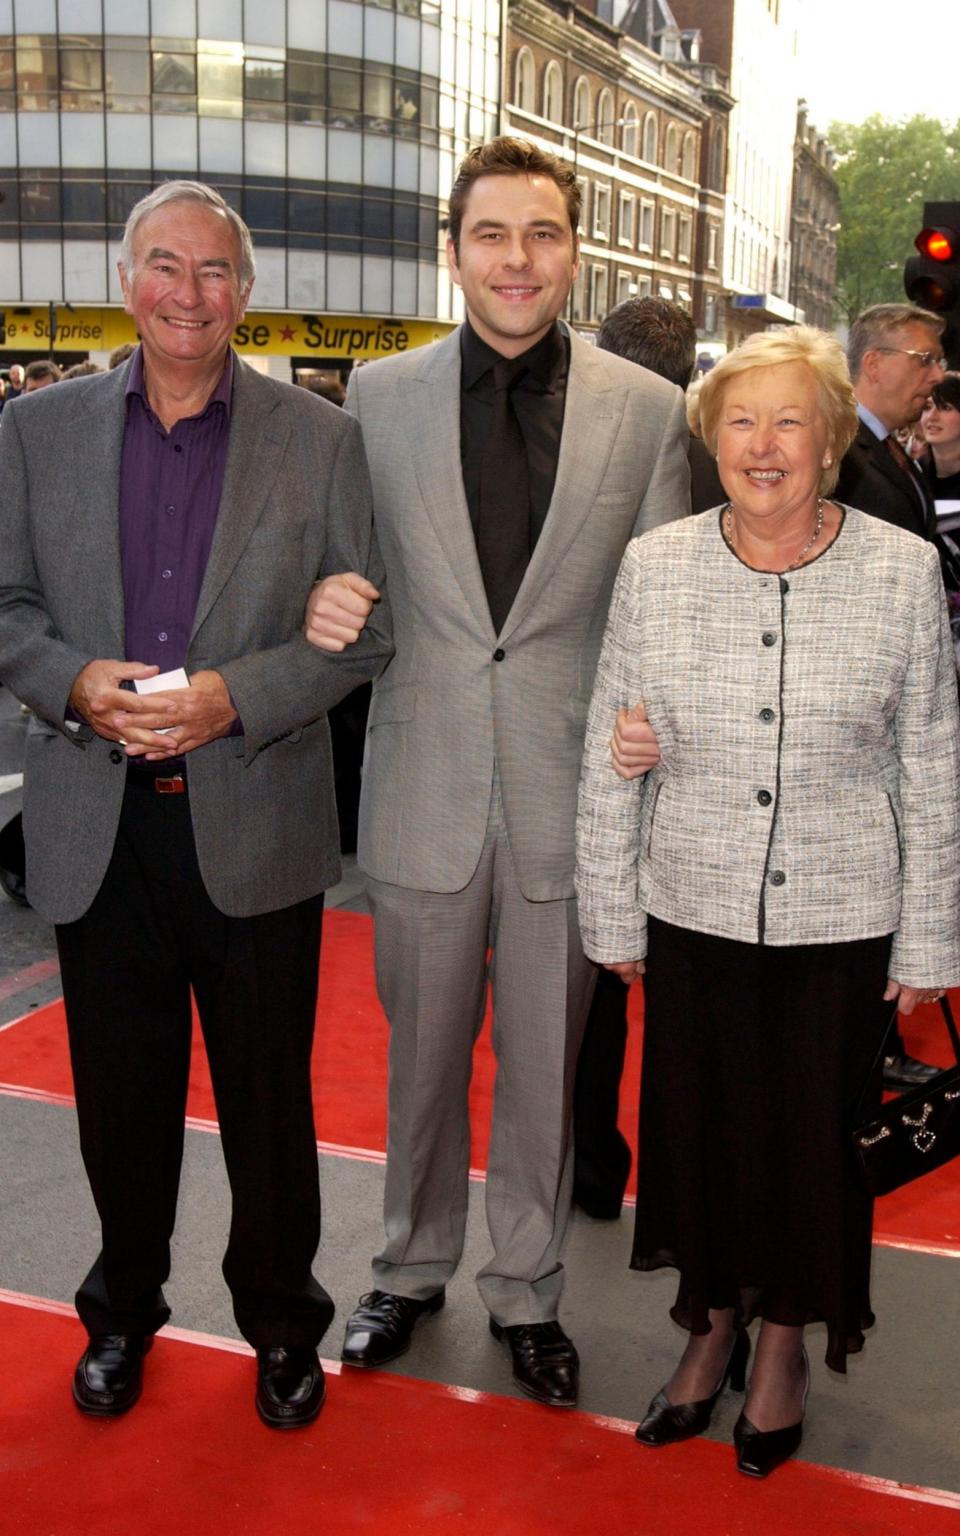 David Walliams and his parents on the red carpet, they are all smiling - James Veysey/Camera Press